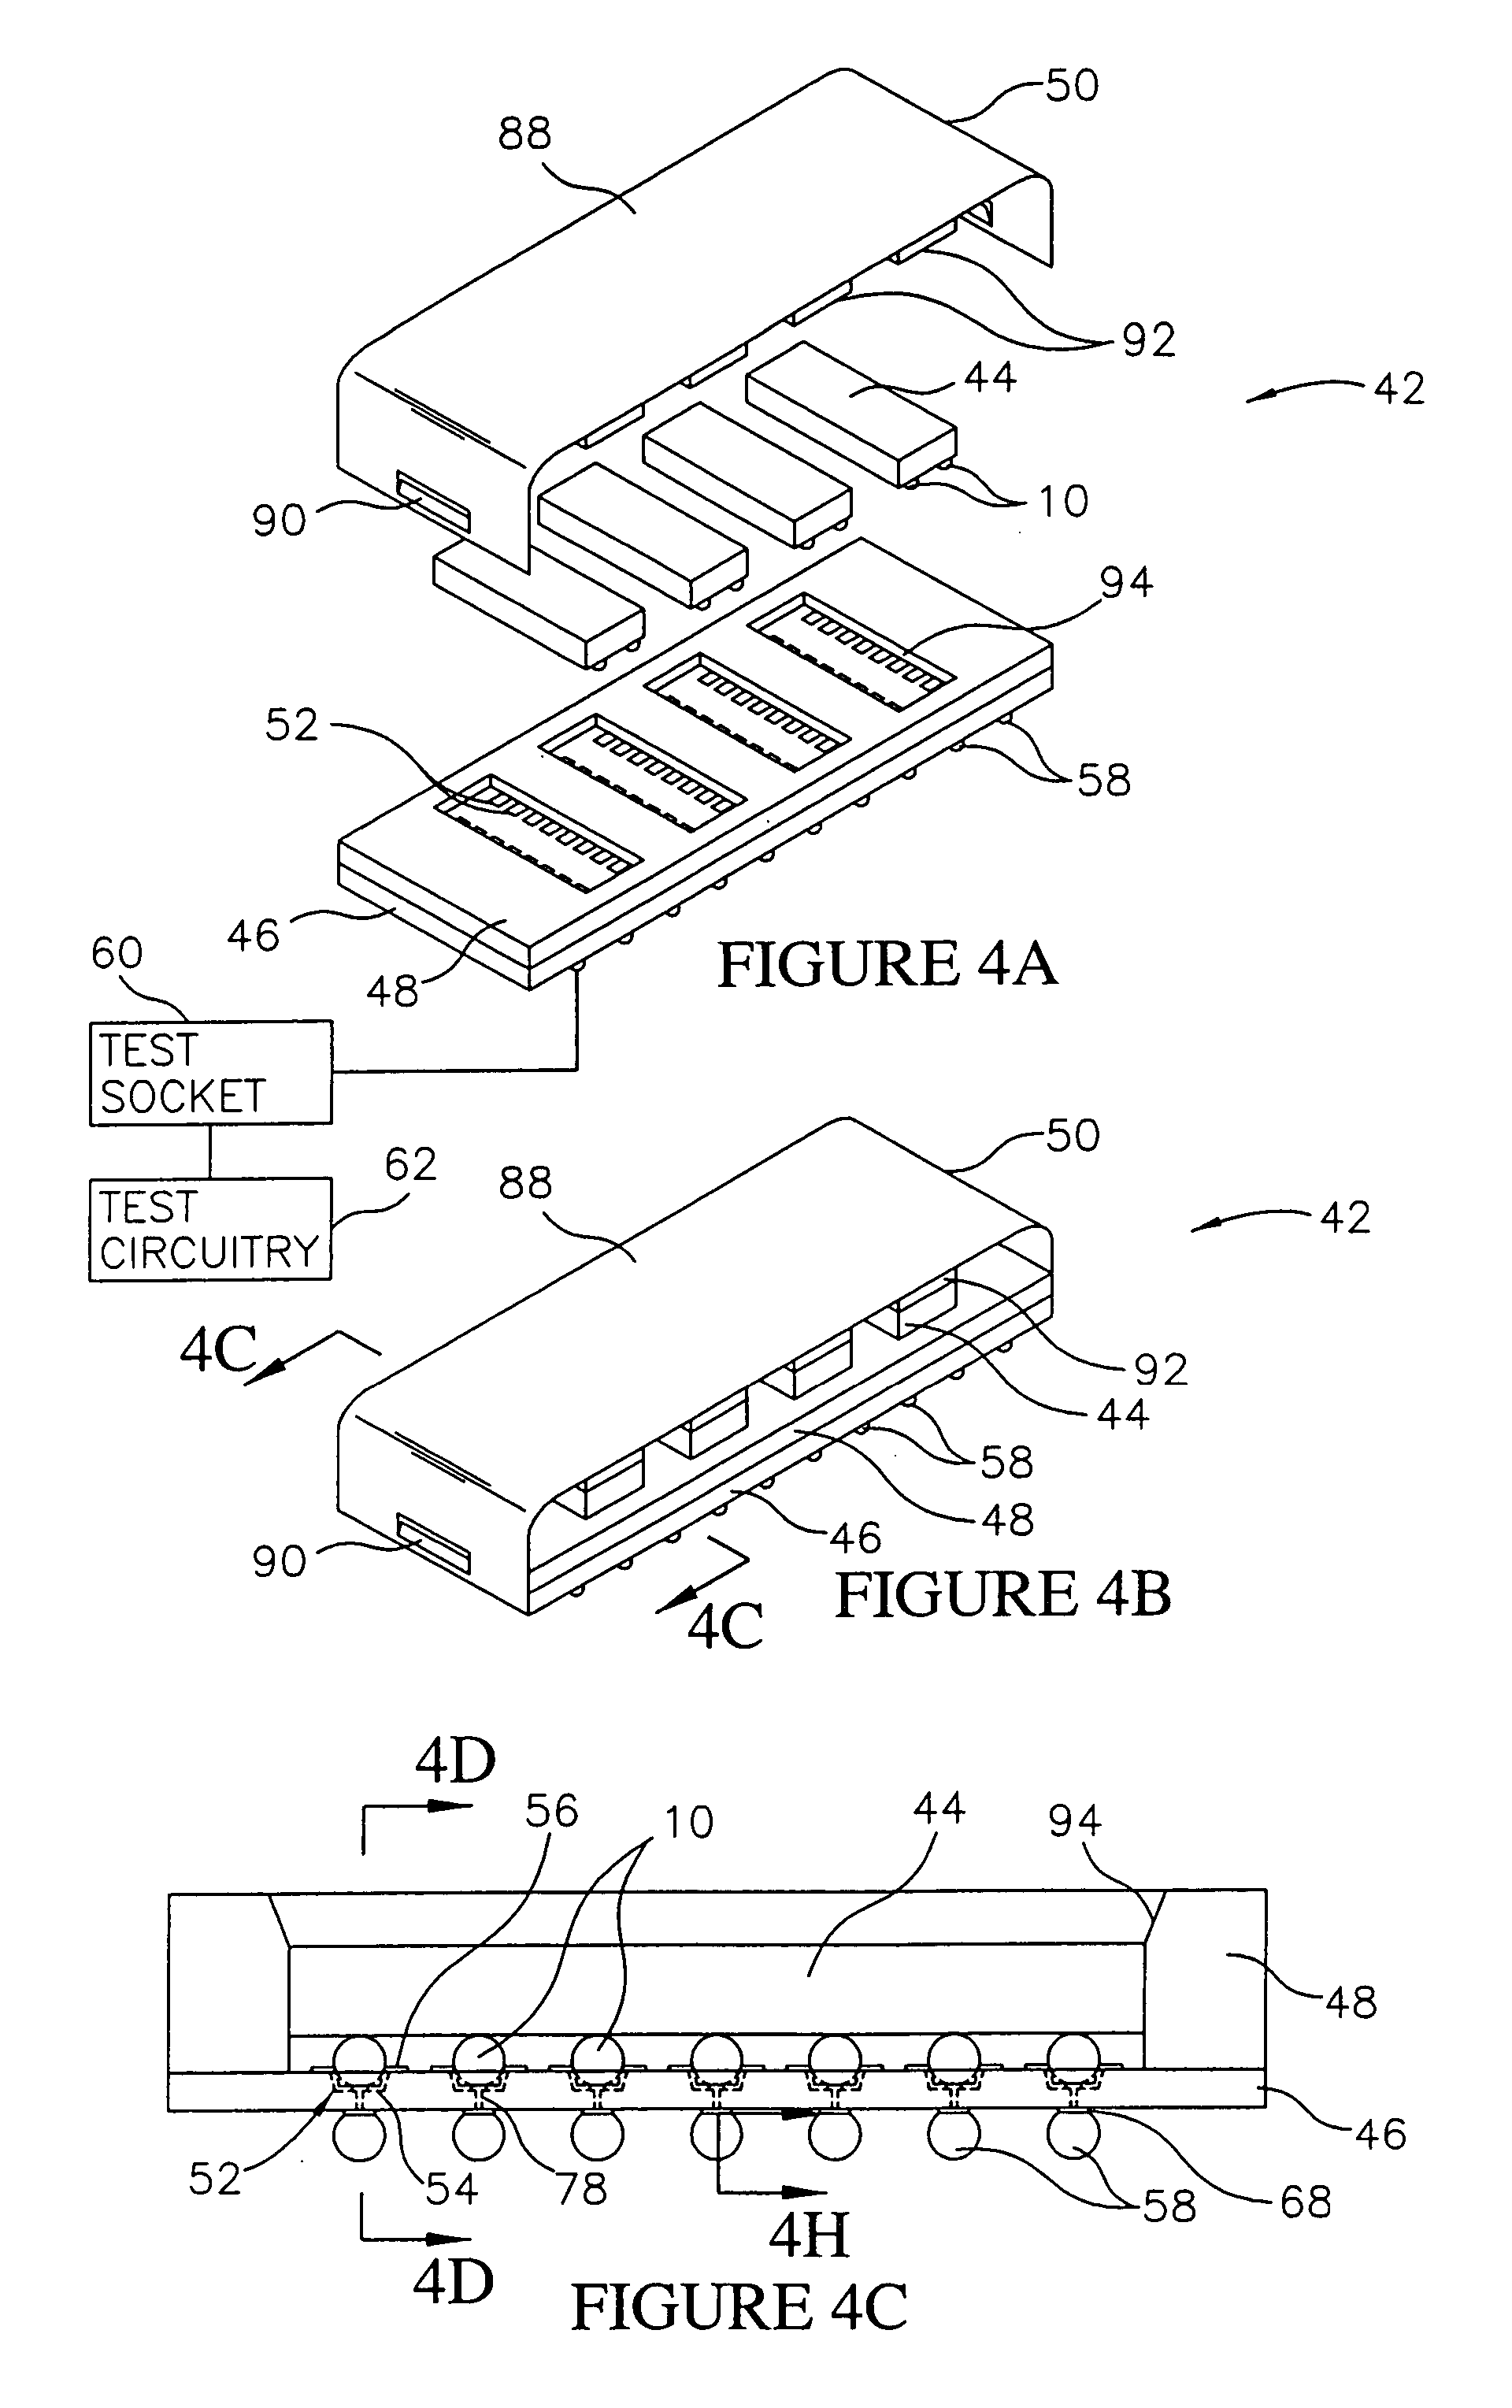 Carrier for cleaning sockets for semiconductor components having contact balls